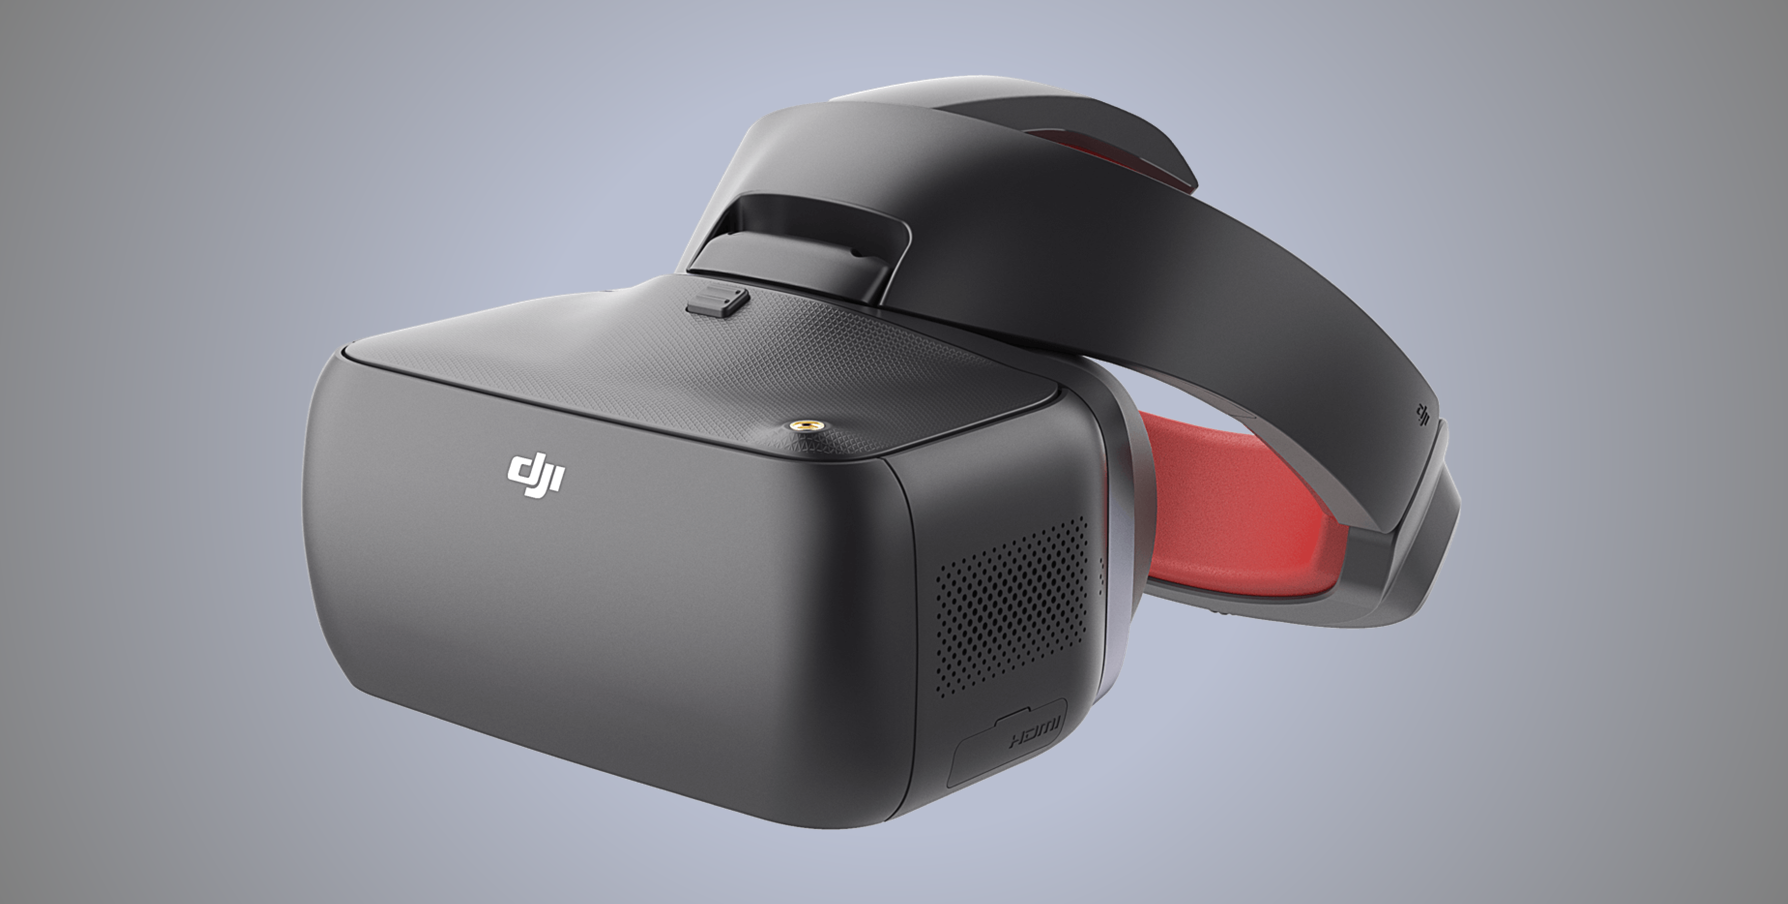 Latest goggles from DJI